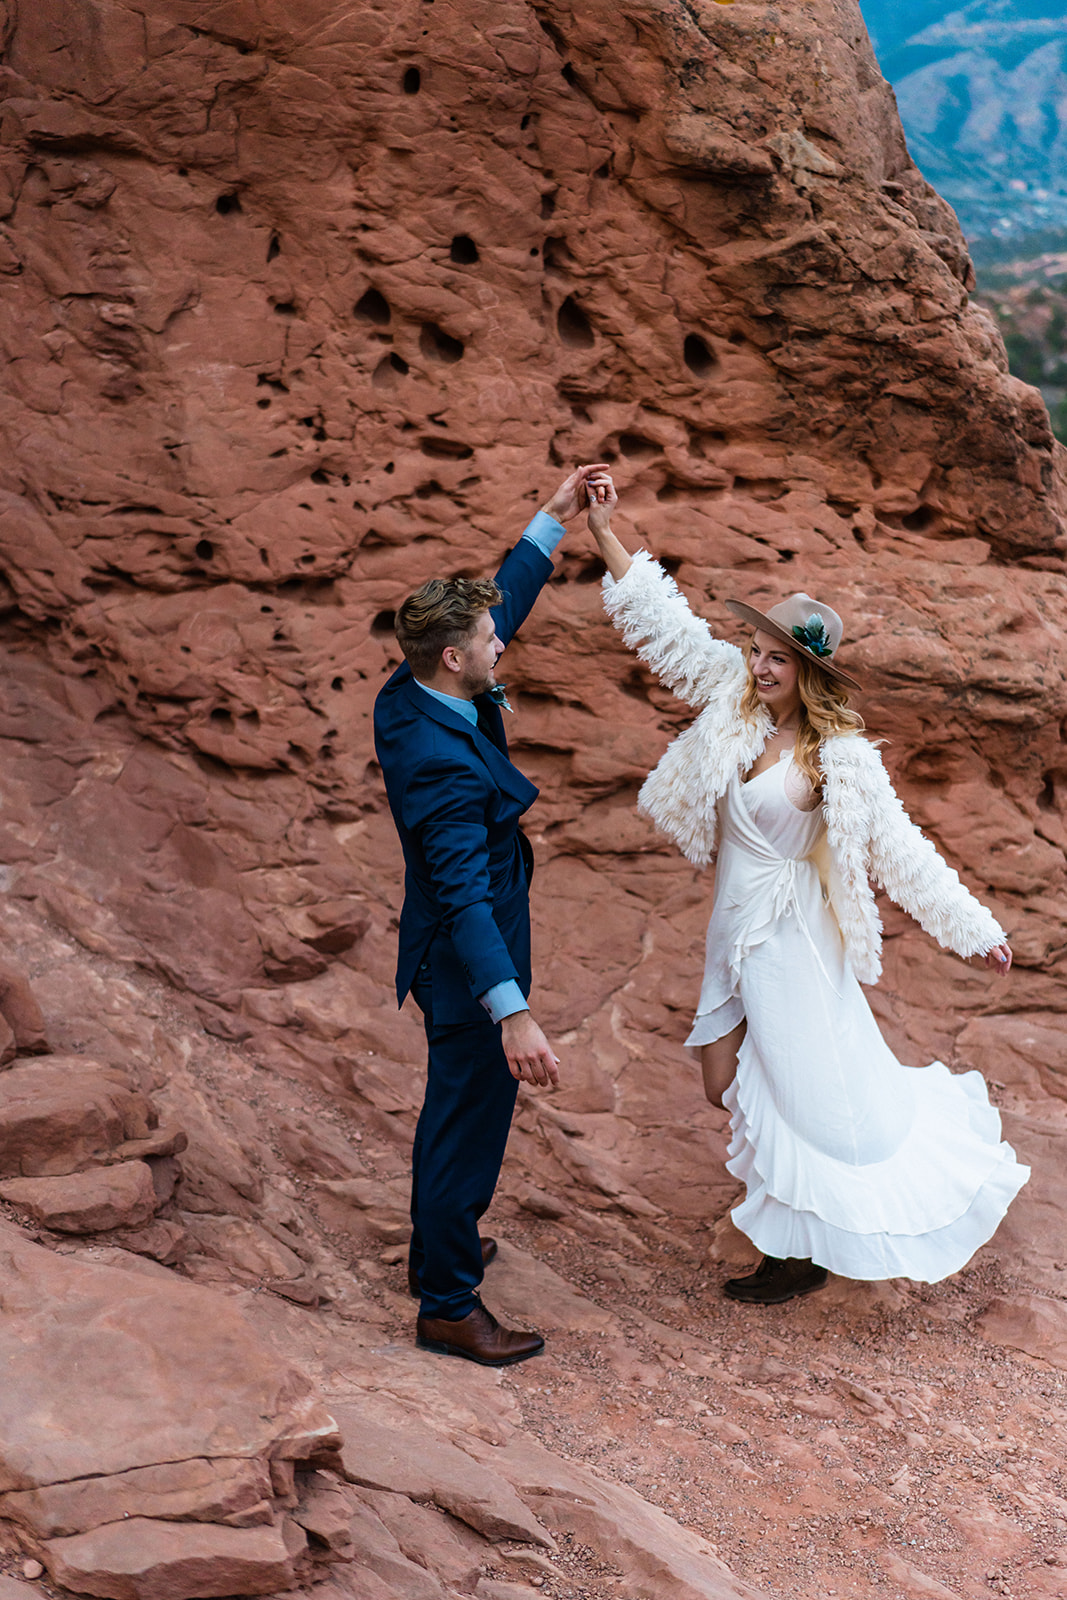 Newly engaged couple dancing in front of bright red rocks